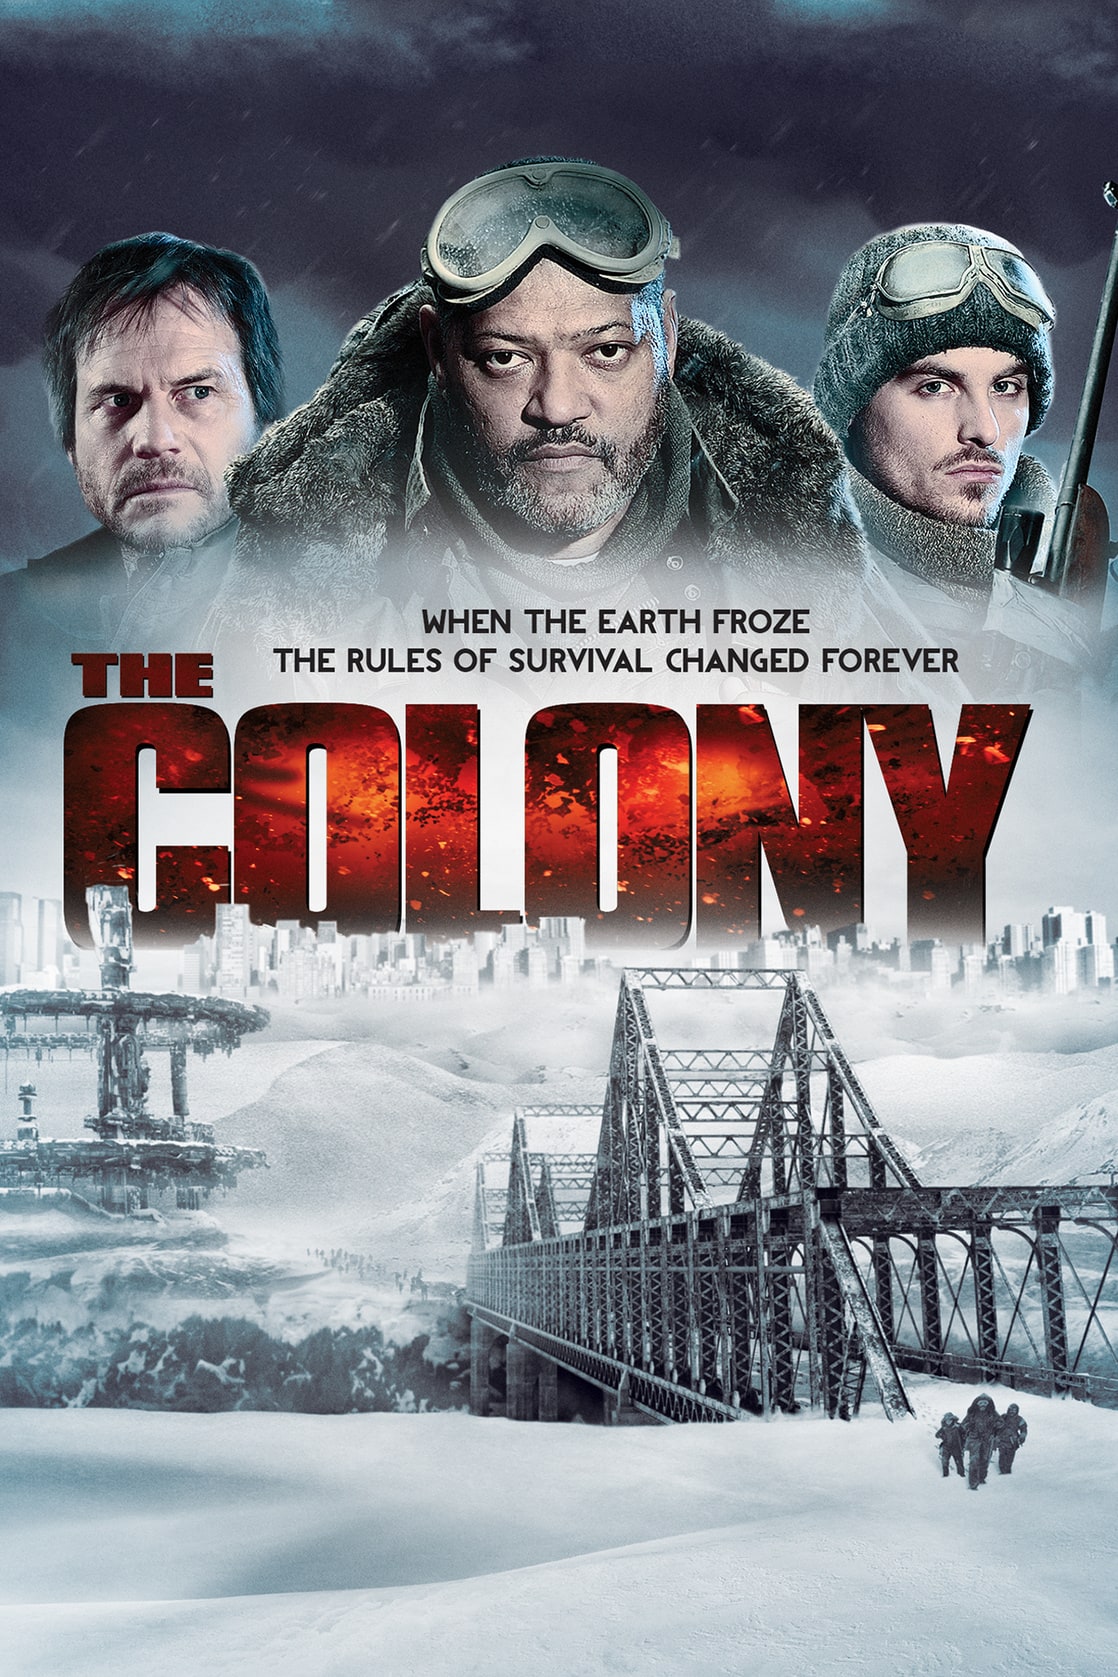 2013 The Colony